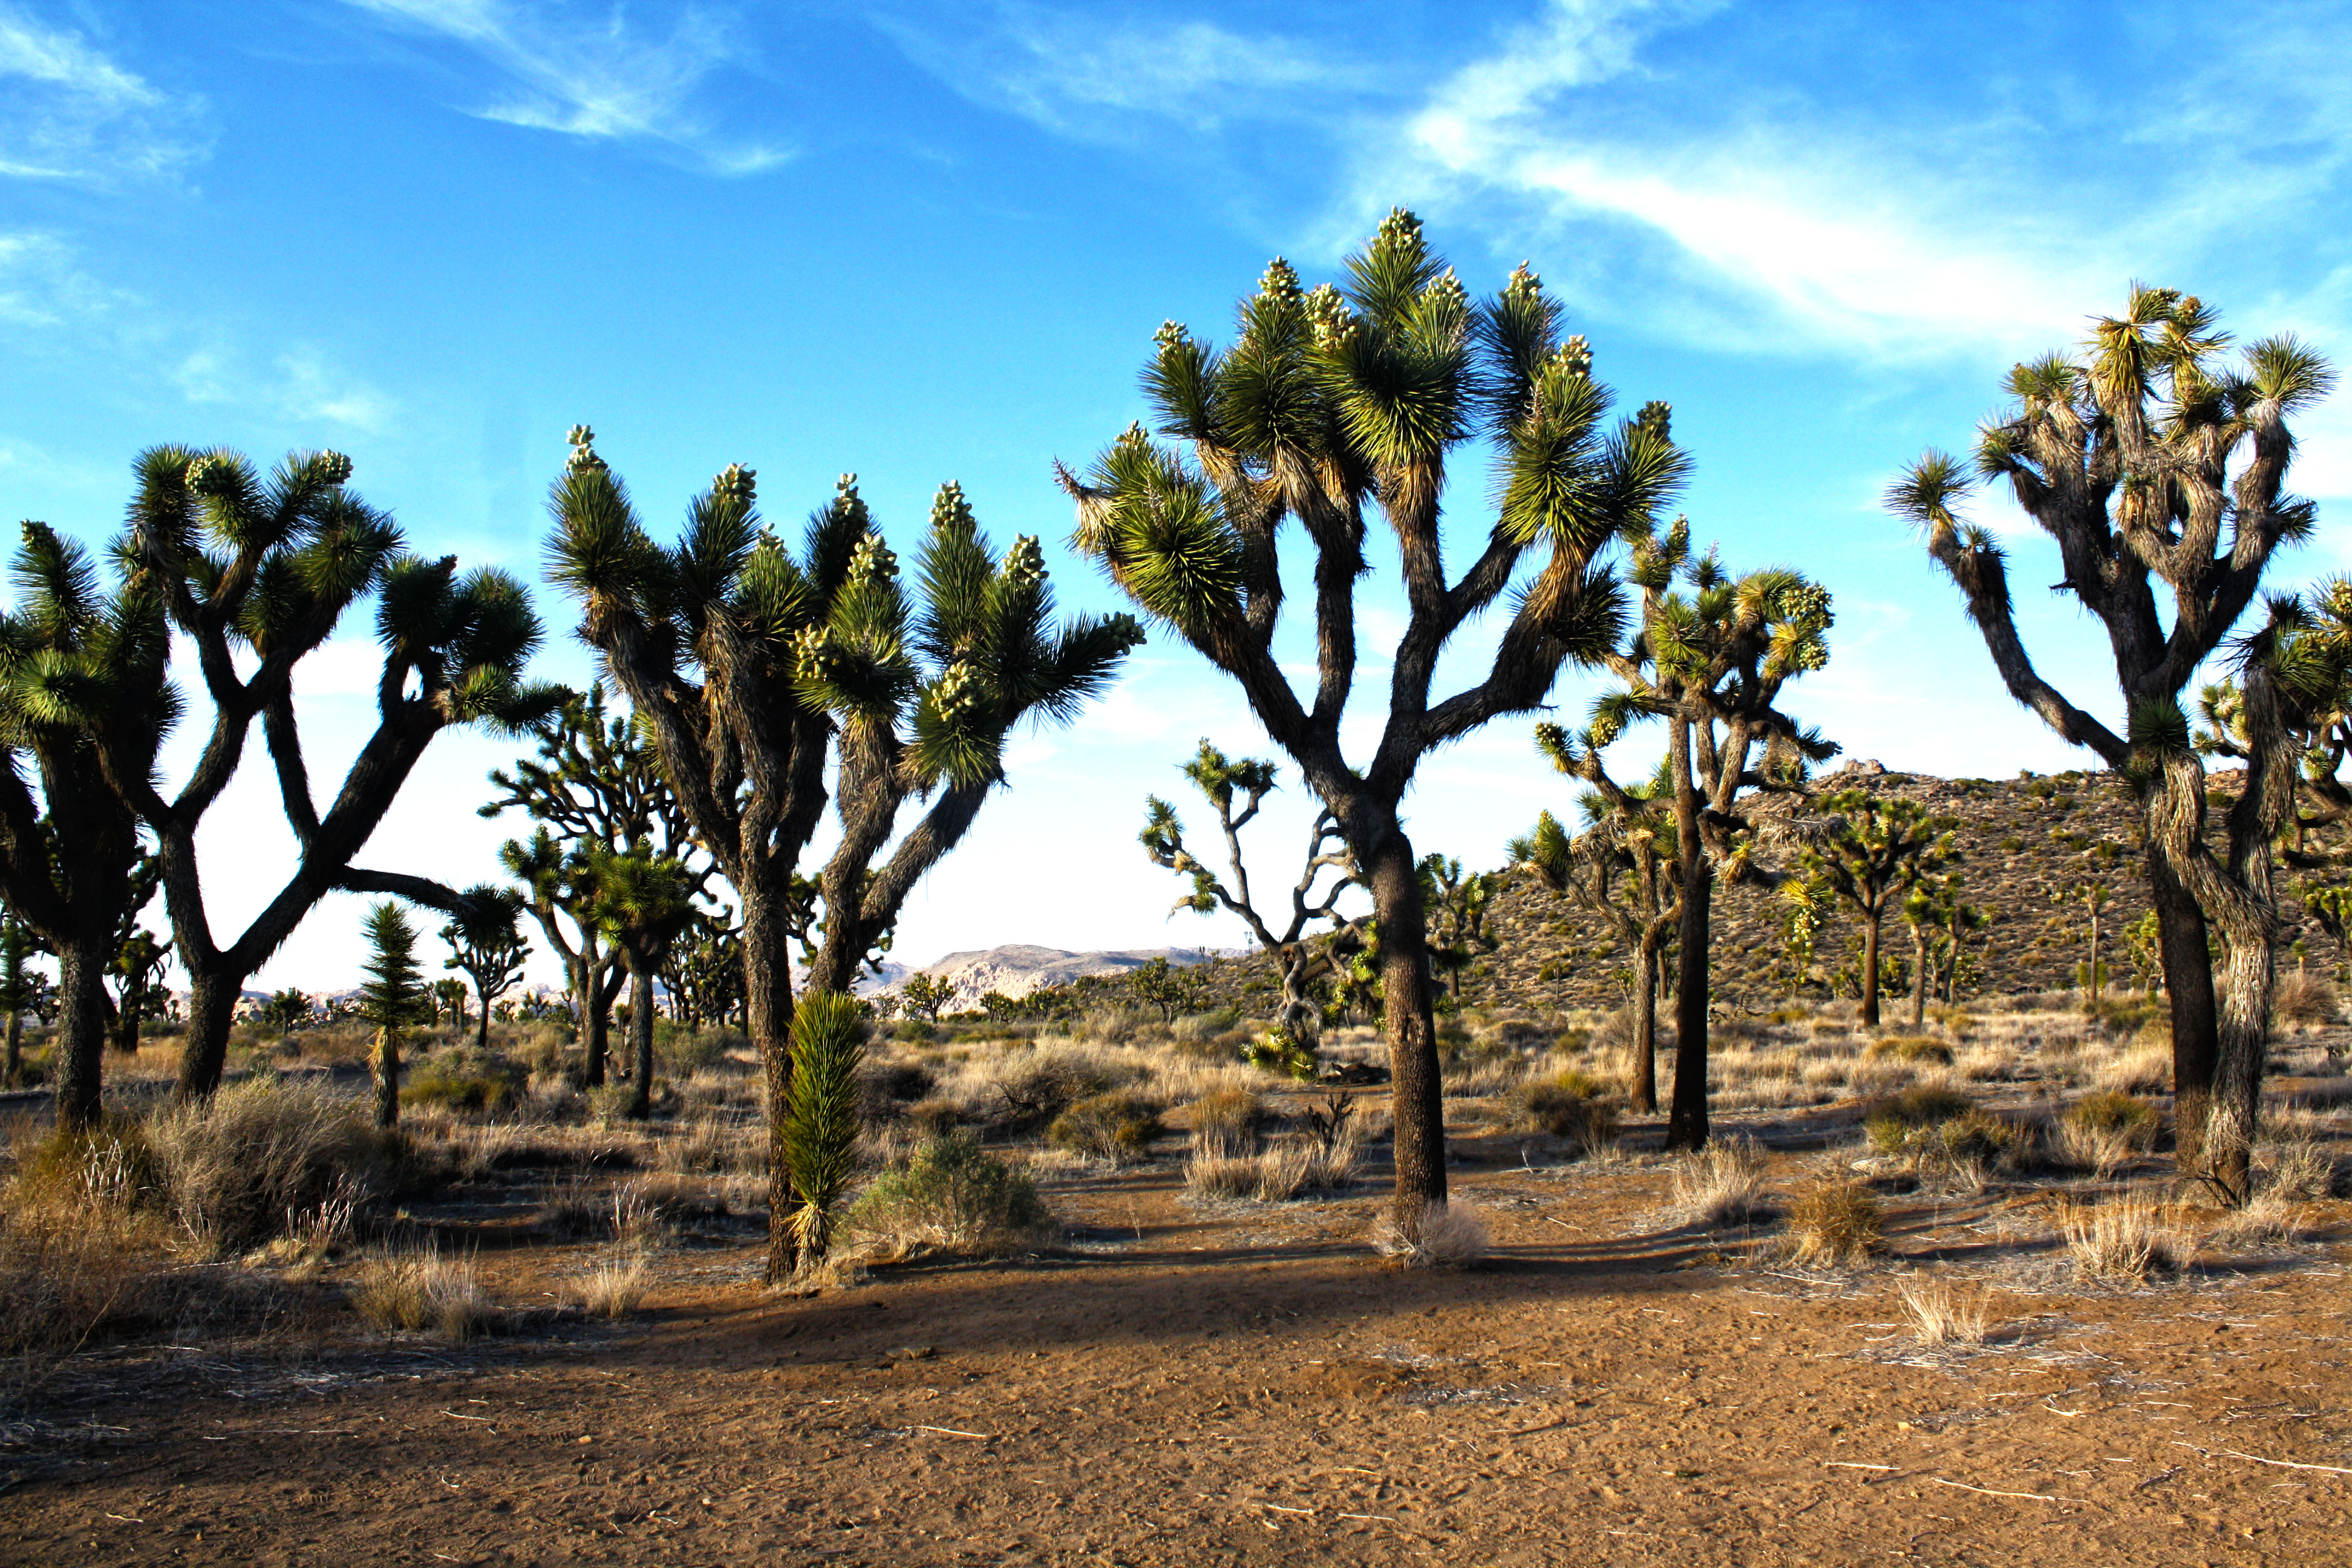 Day 16: Joshua Tree National Park, Yucca Valley – Cool Story Bro..